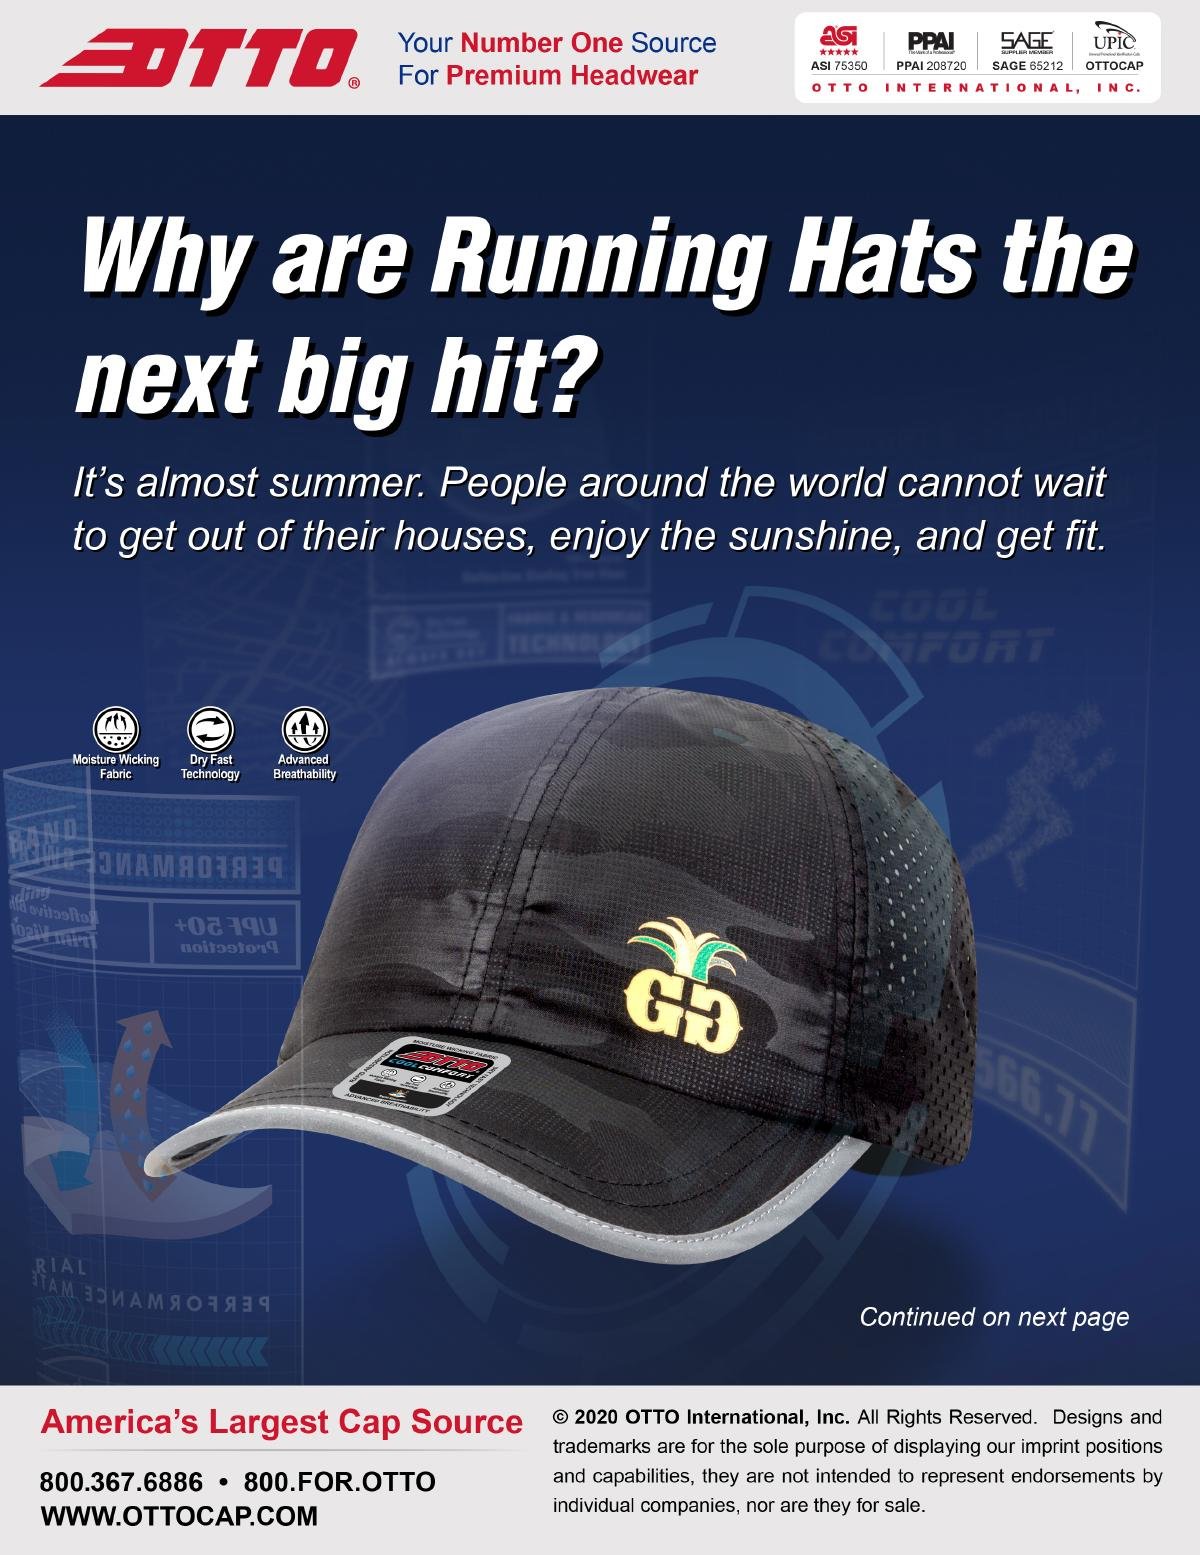 Why are Running Hats the next big hit?